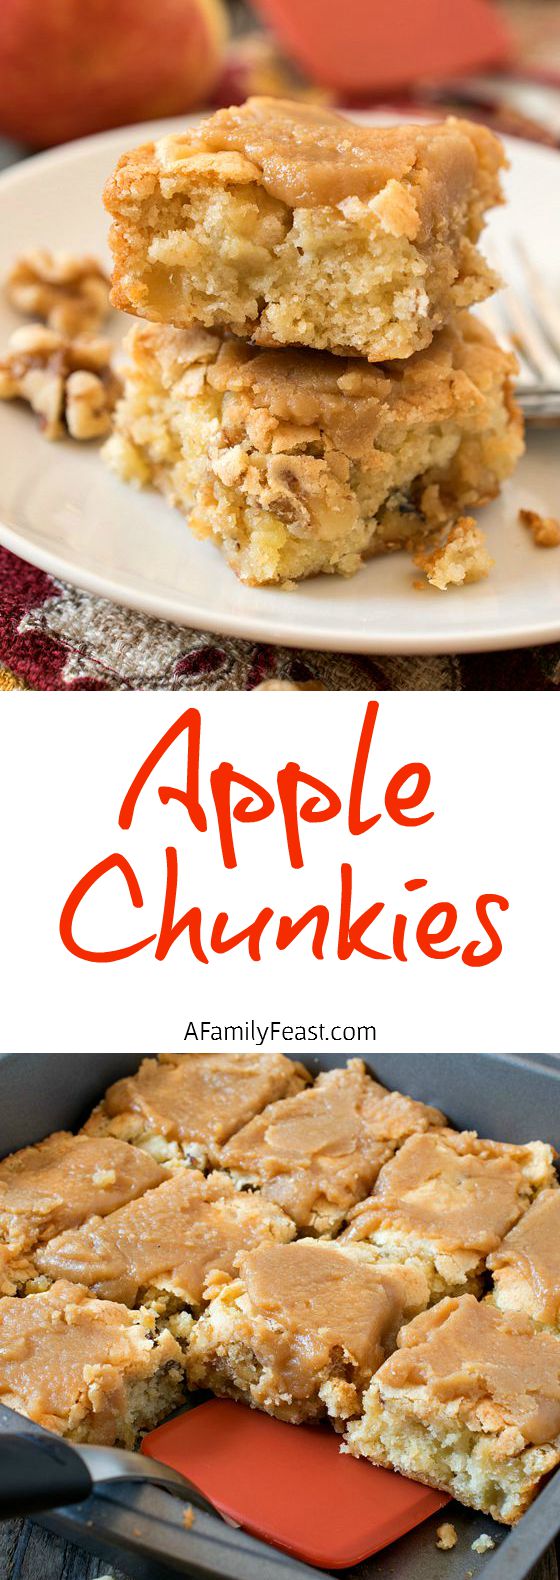 Apple Chunkies - A vintage recipe for sweet little bars stuffed with chunks of apples and walnuts.